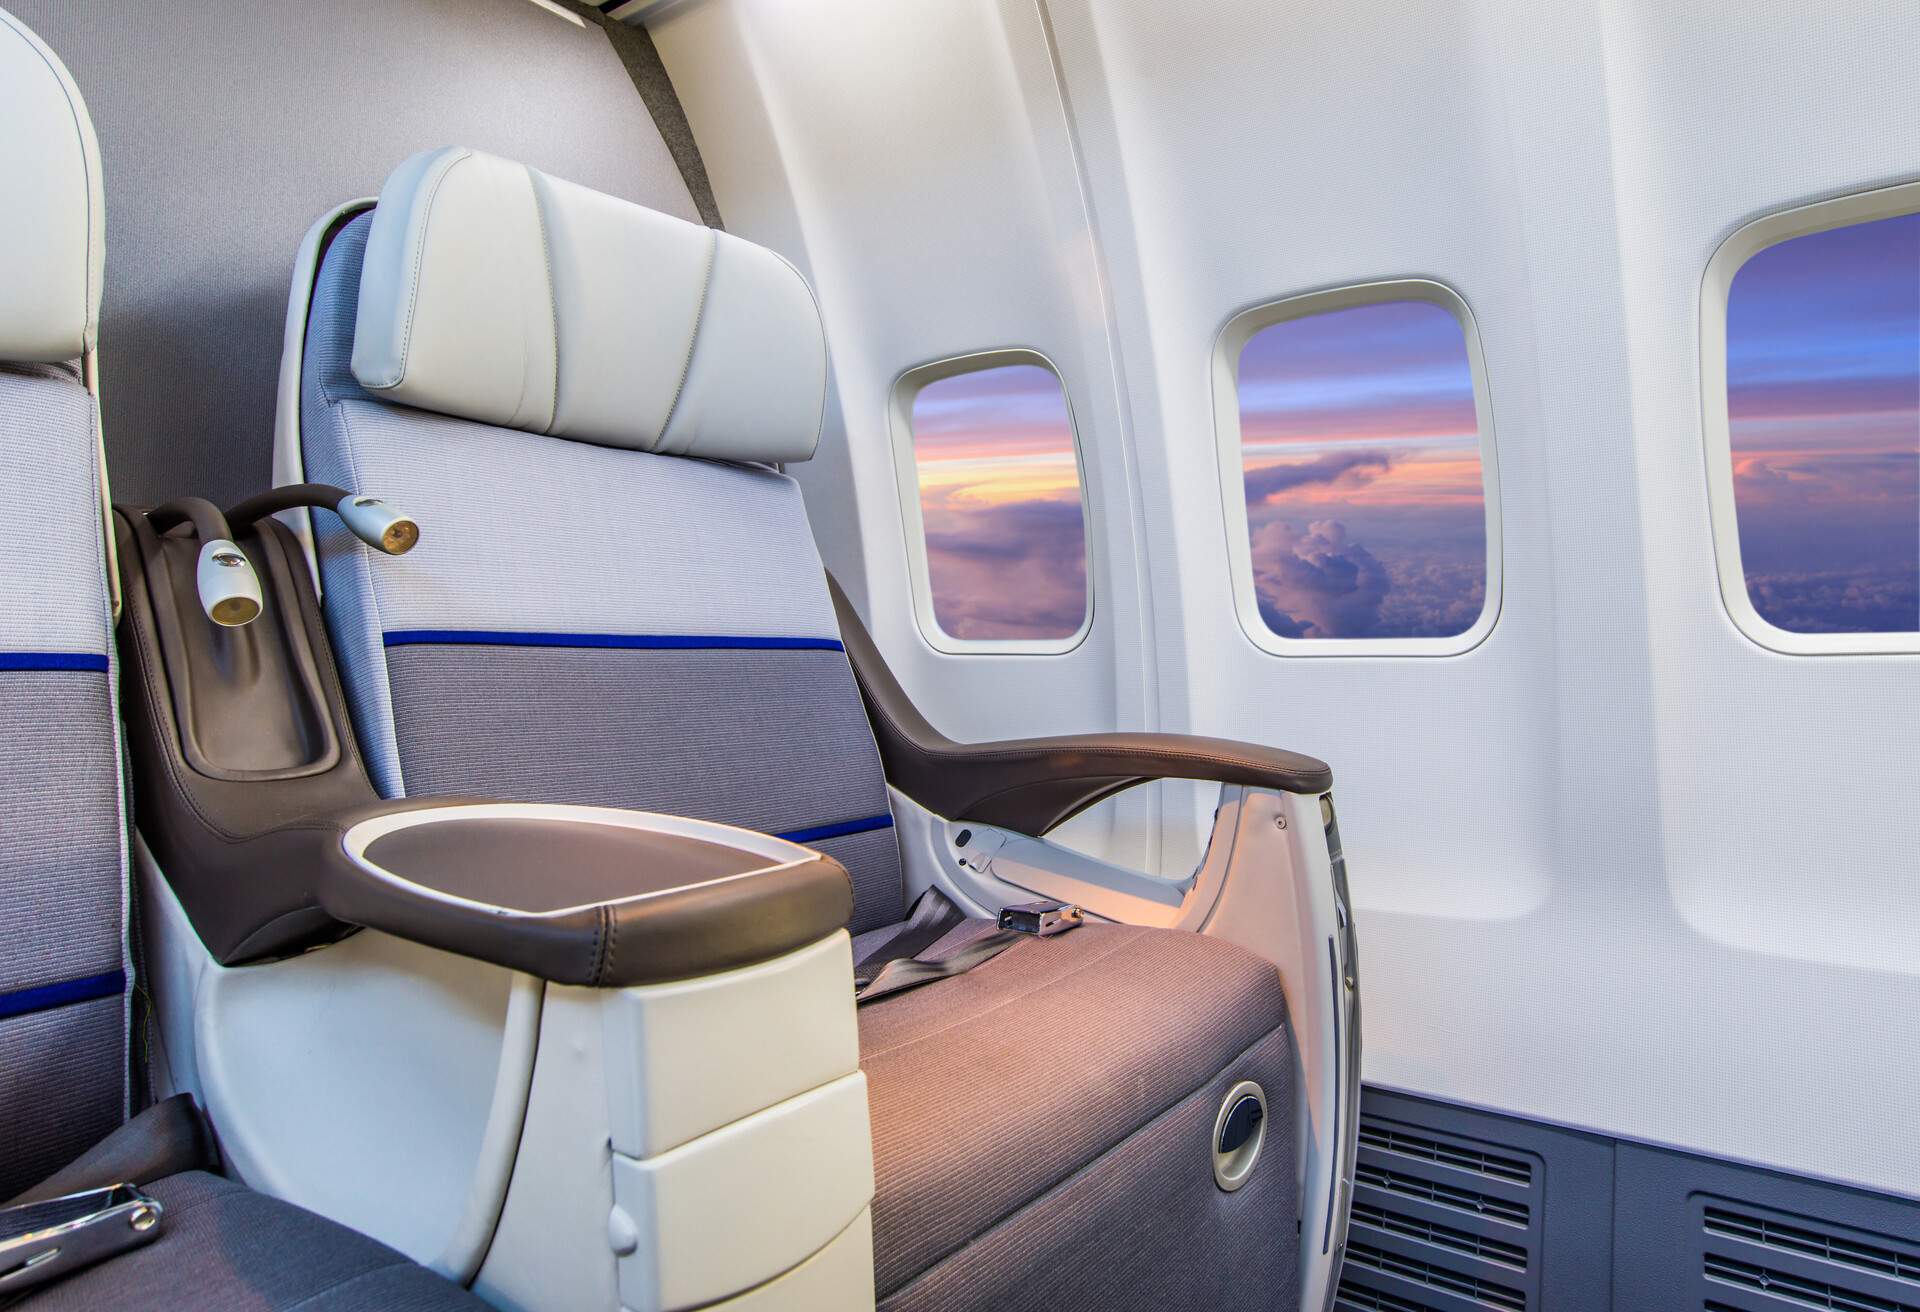 An empty business-class window seat inside an airplane with a scenic sky view.